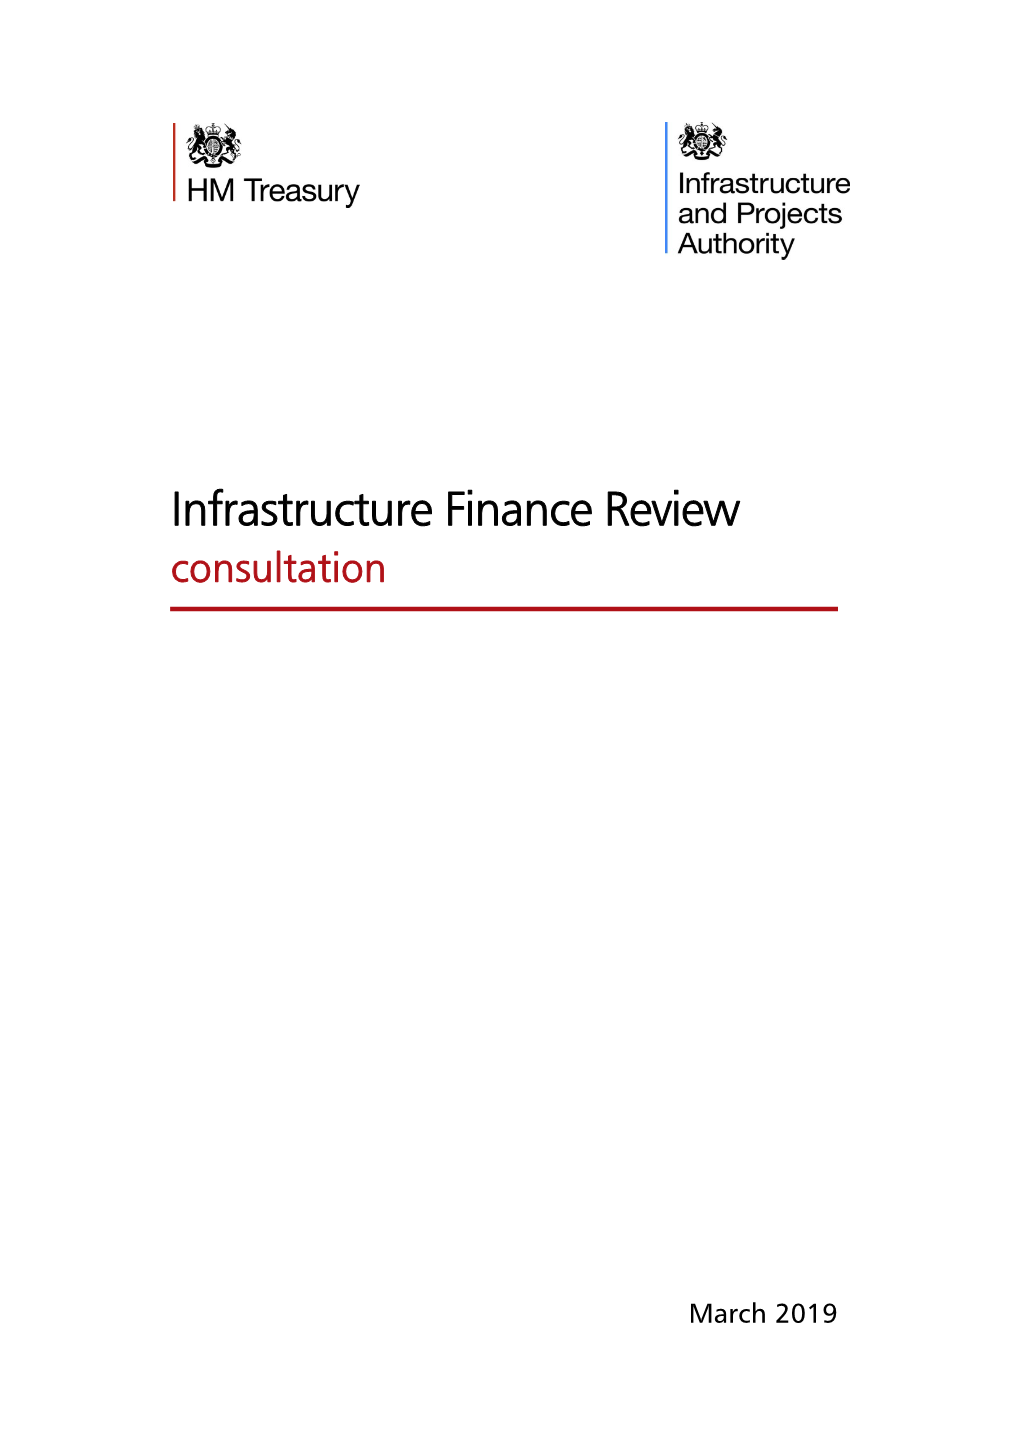 Infrastructure Finance Review Consultation